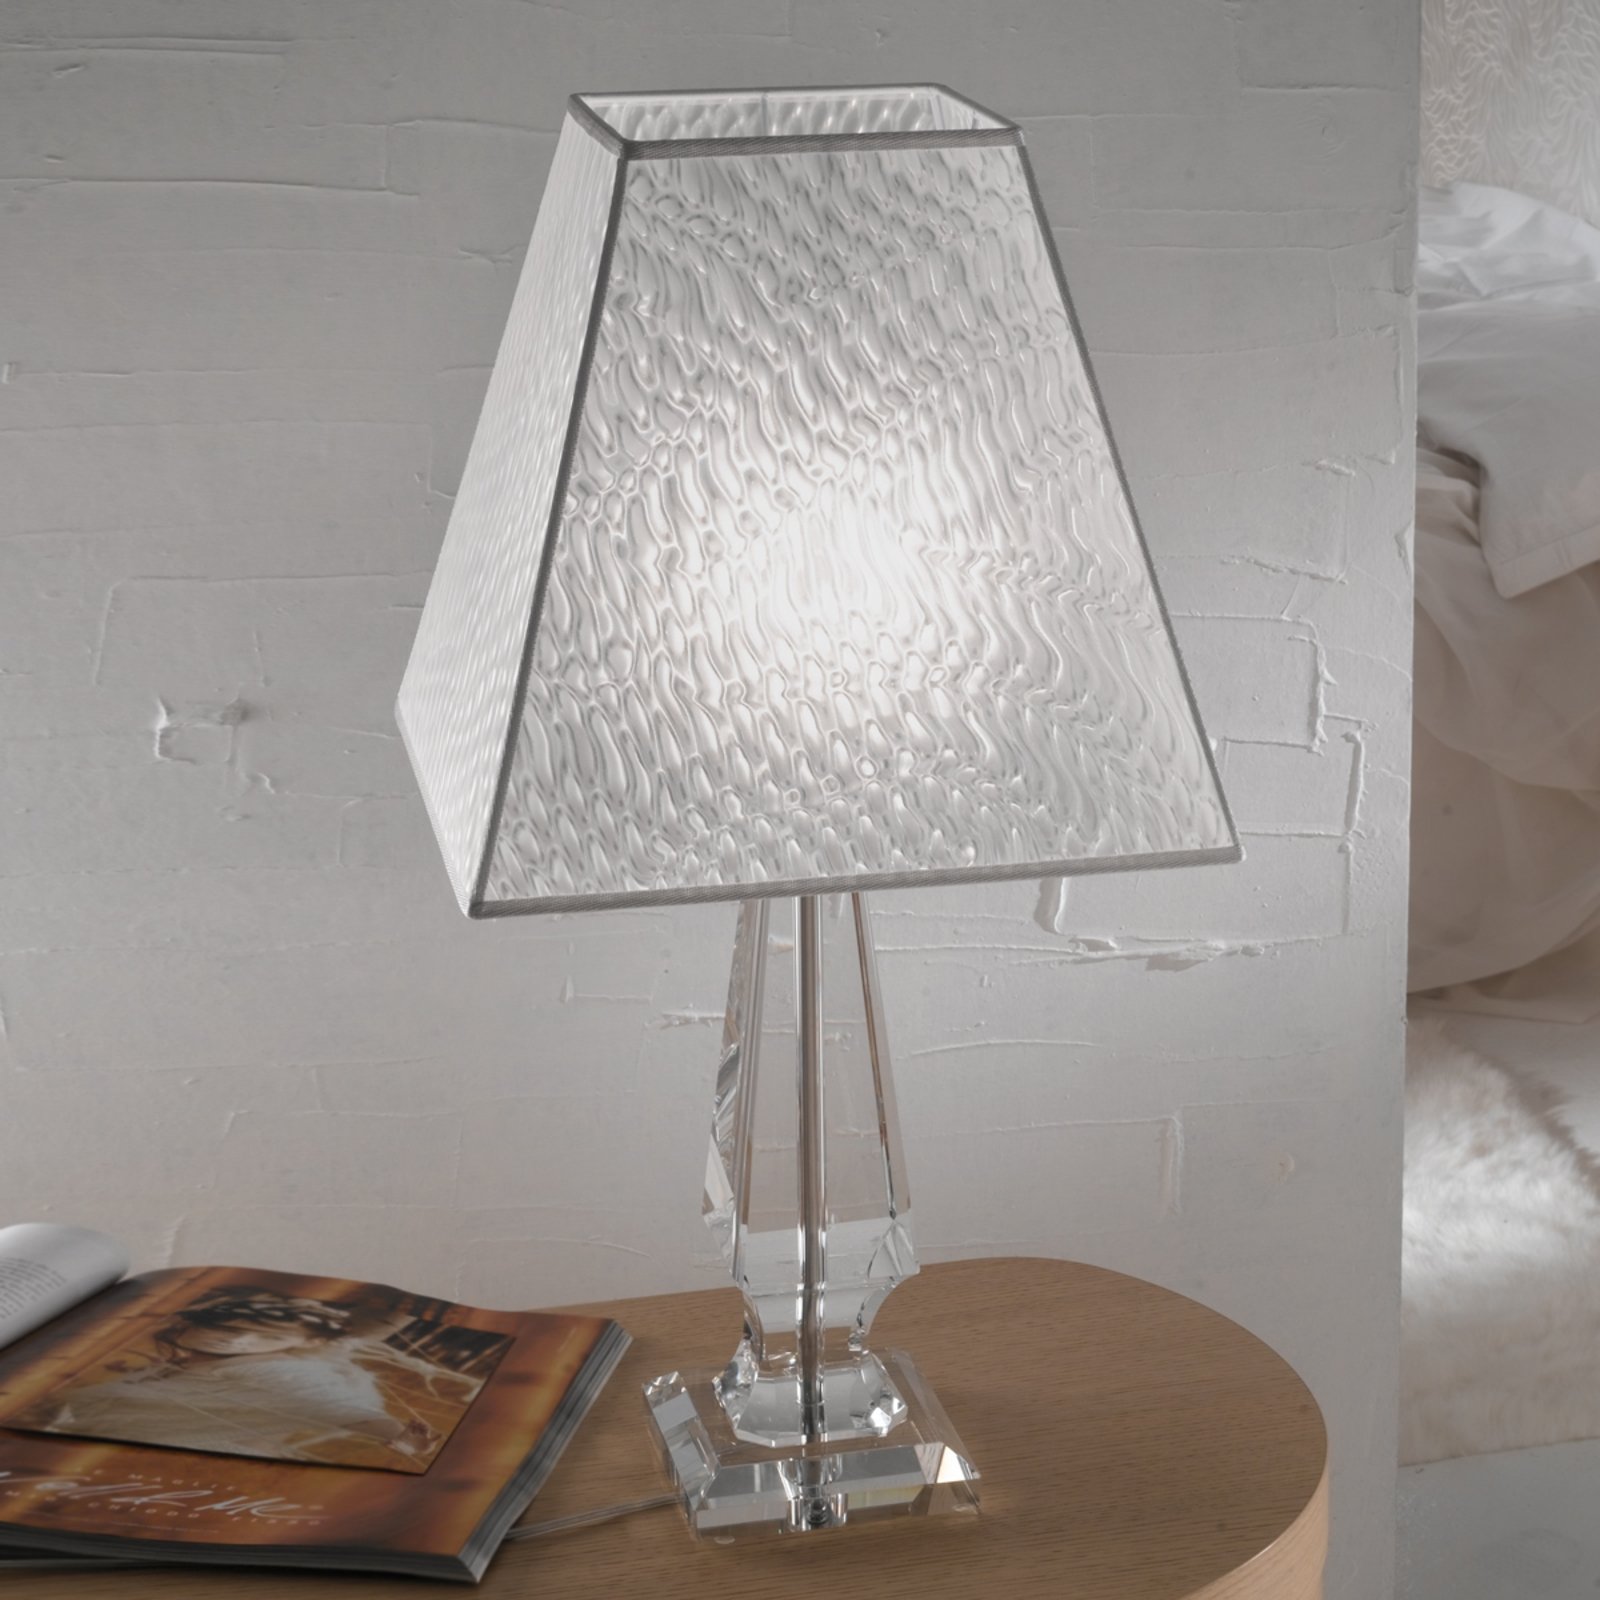 Light-looking Notte table lamp